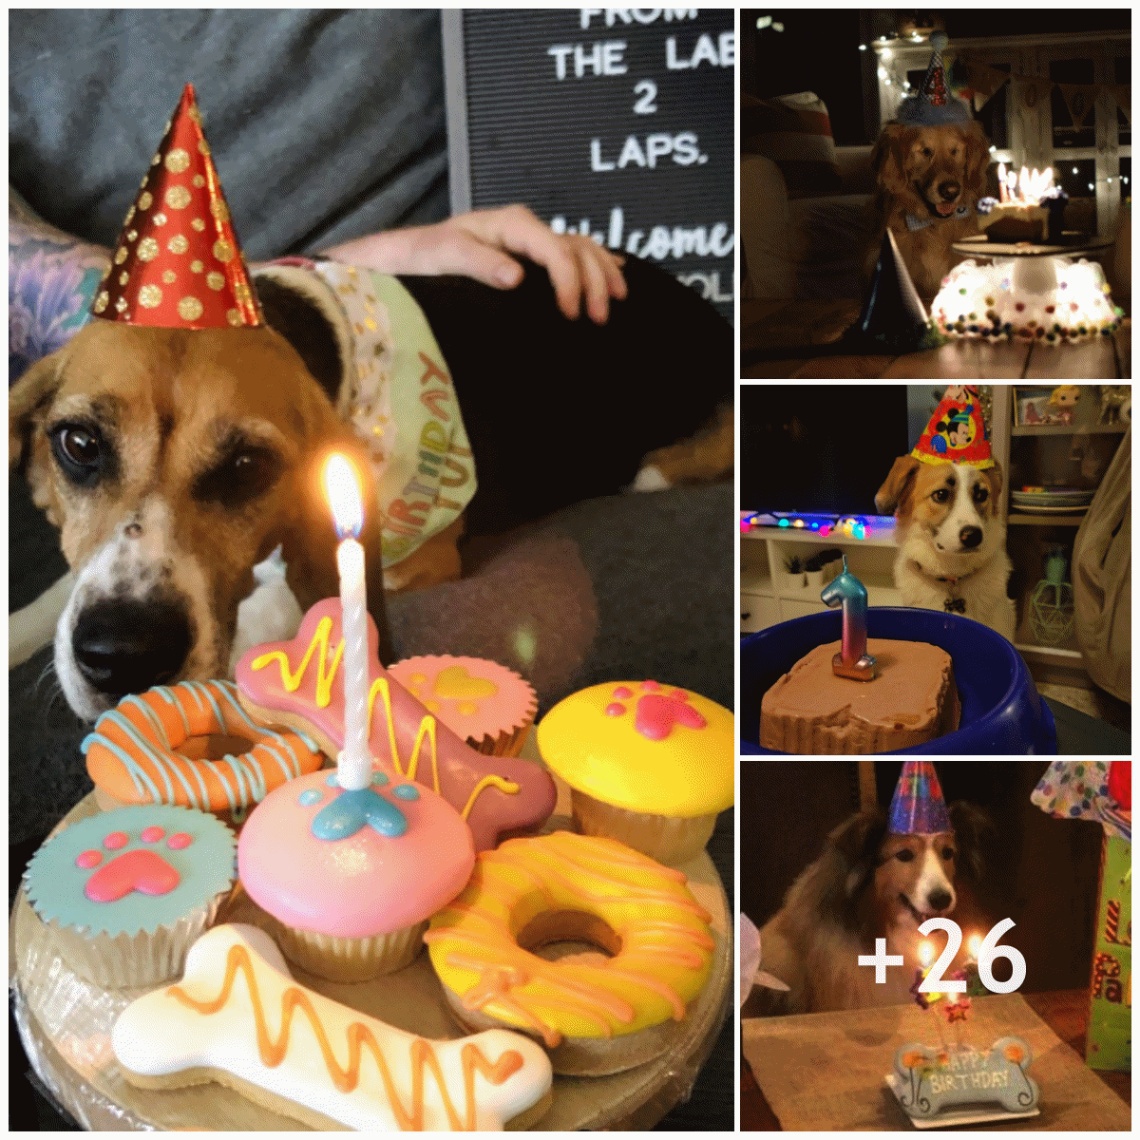 The animal shelter’s elderly dogs shed happy tears on their birthdays.